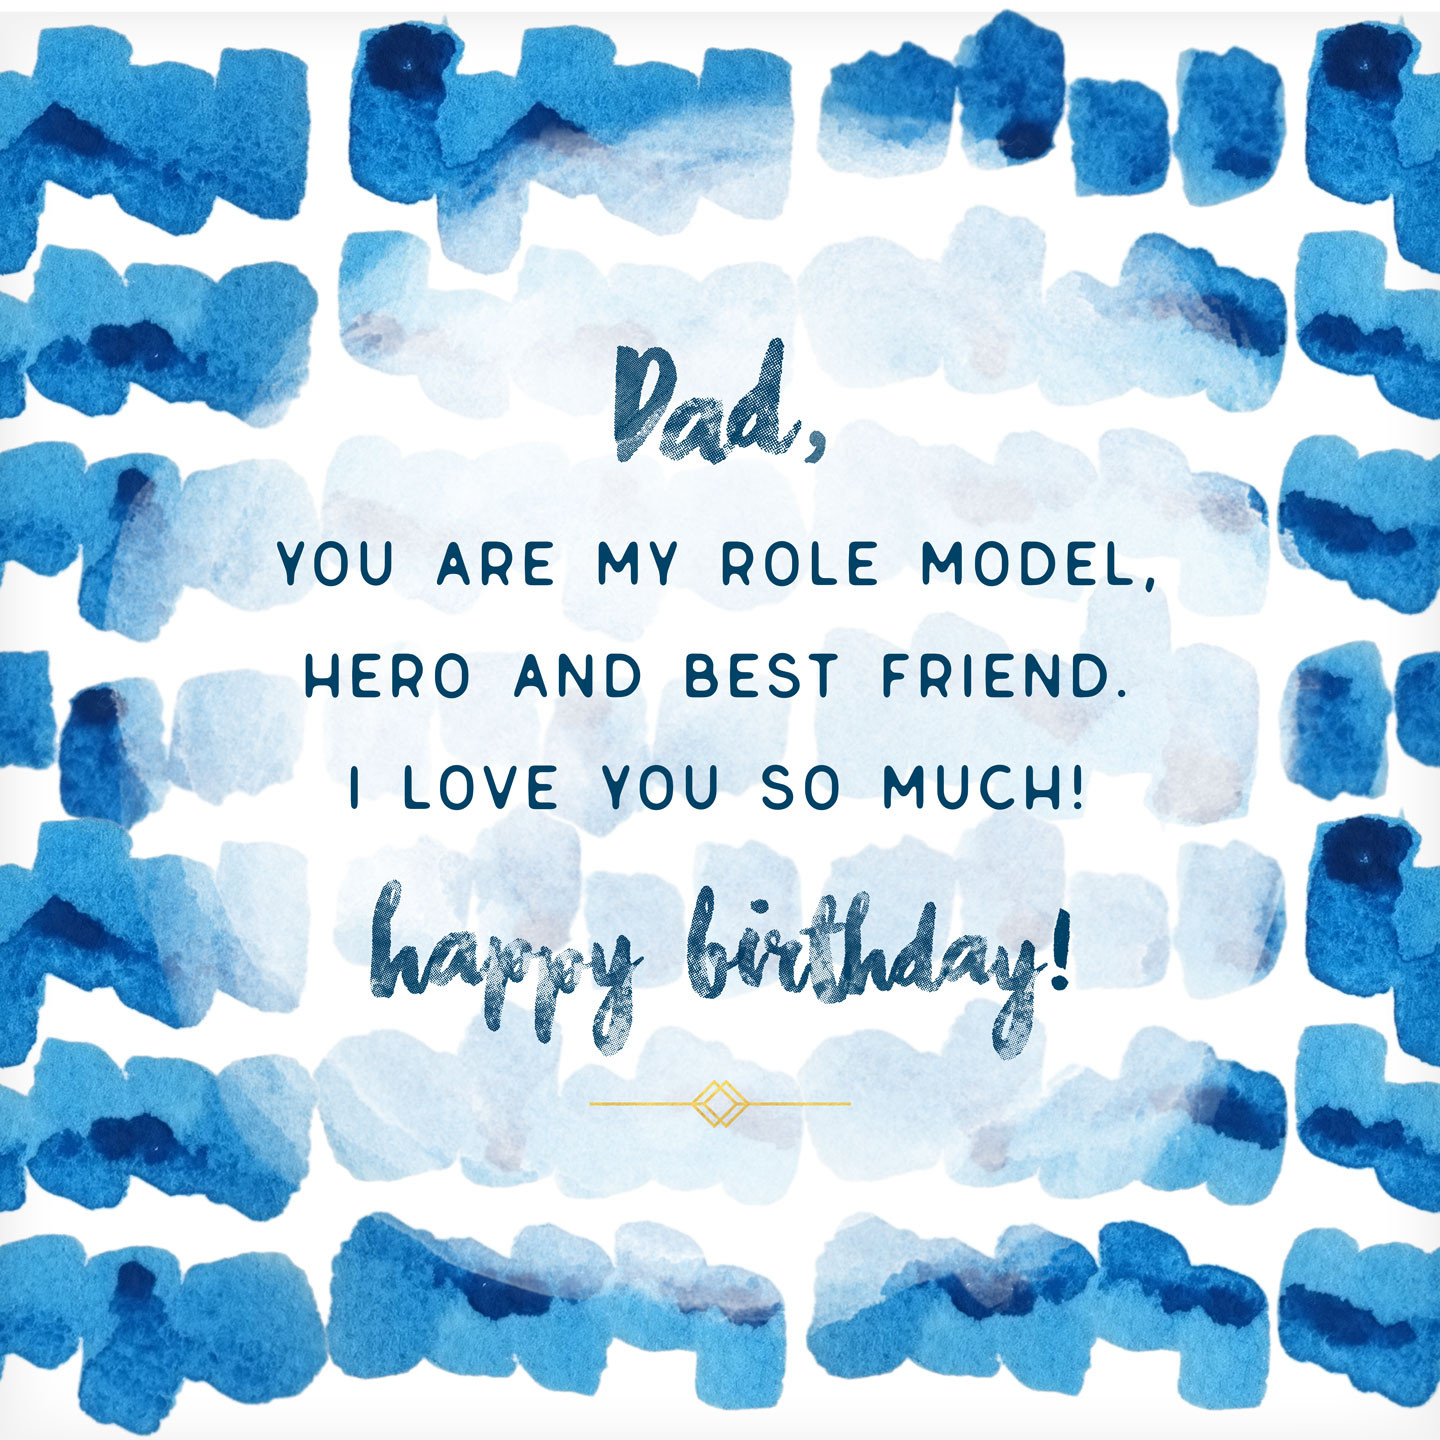 Best ideas about Birthday Card Messages
. Save or Pin What to Write in a Birthday Card 48 Birthday Messages and Now.